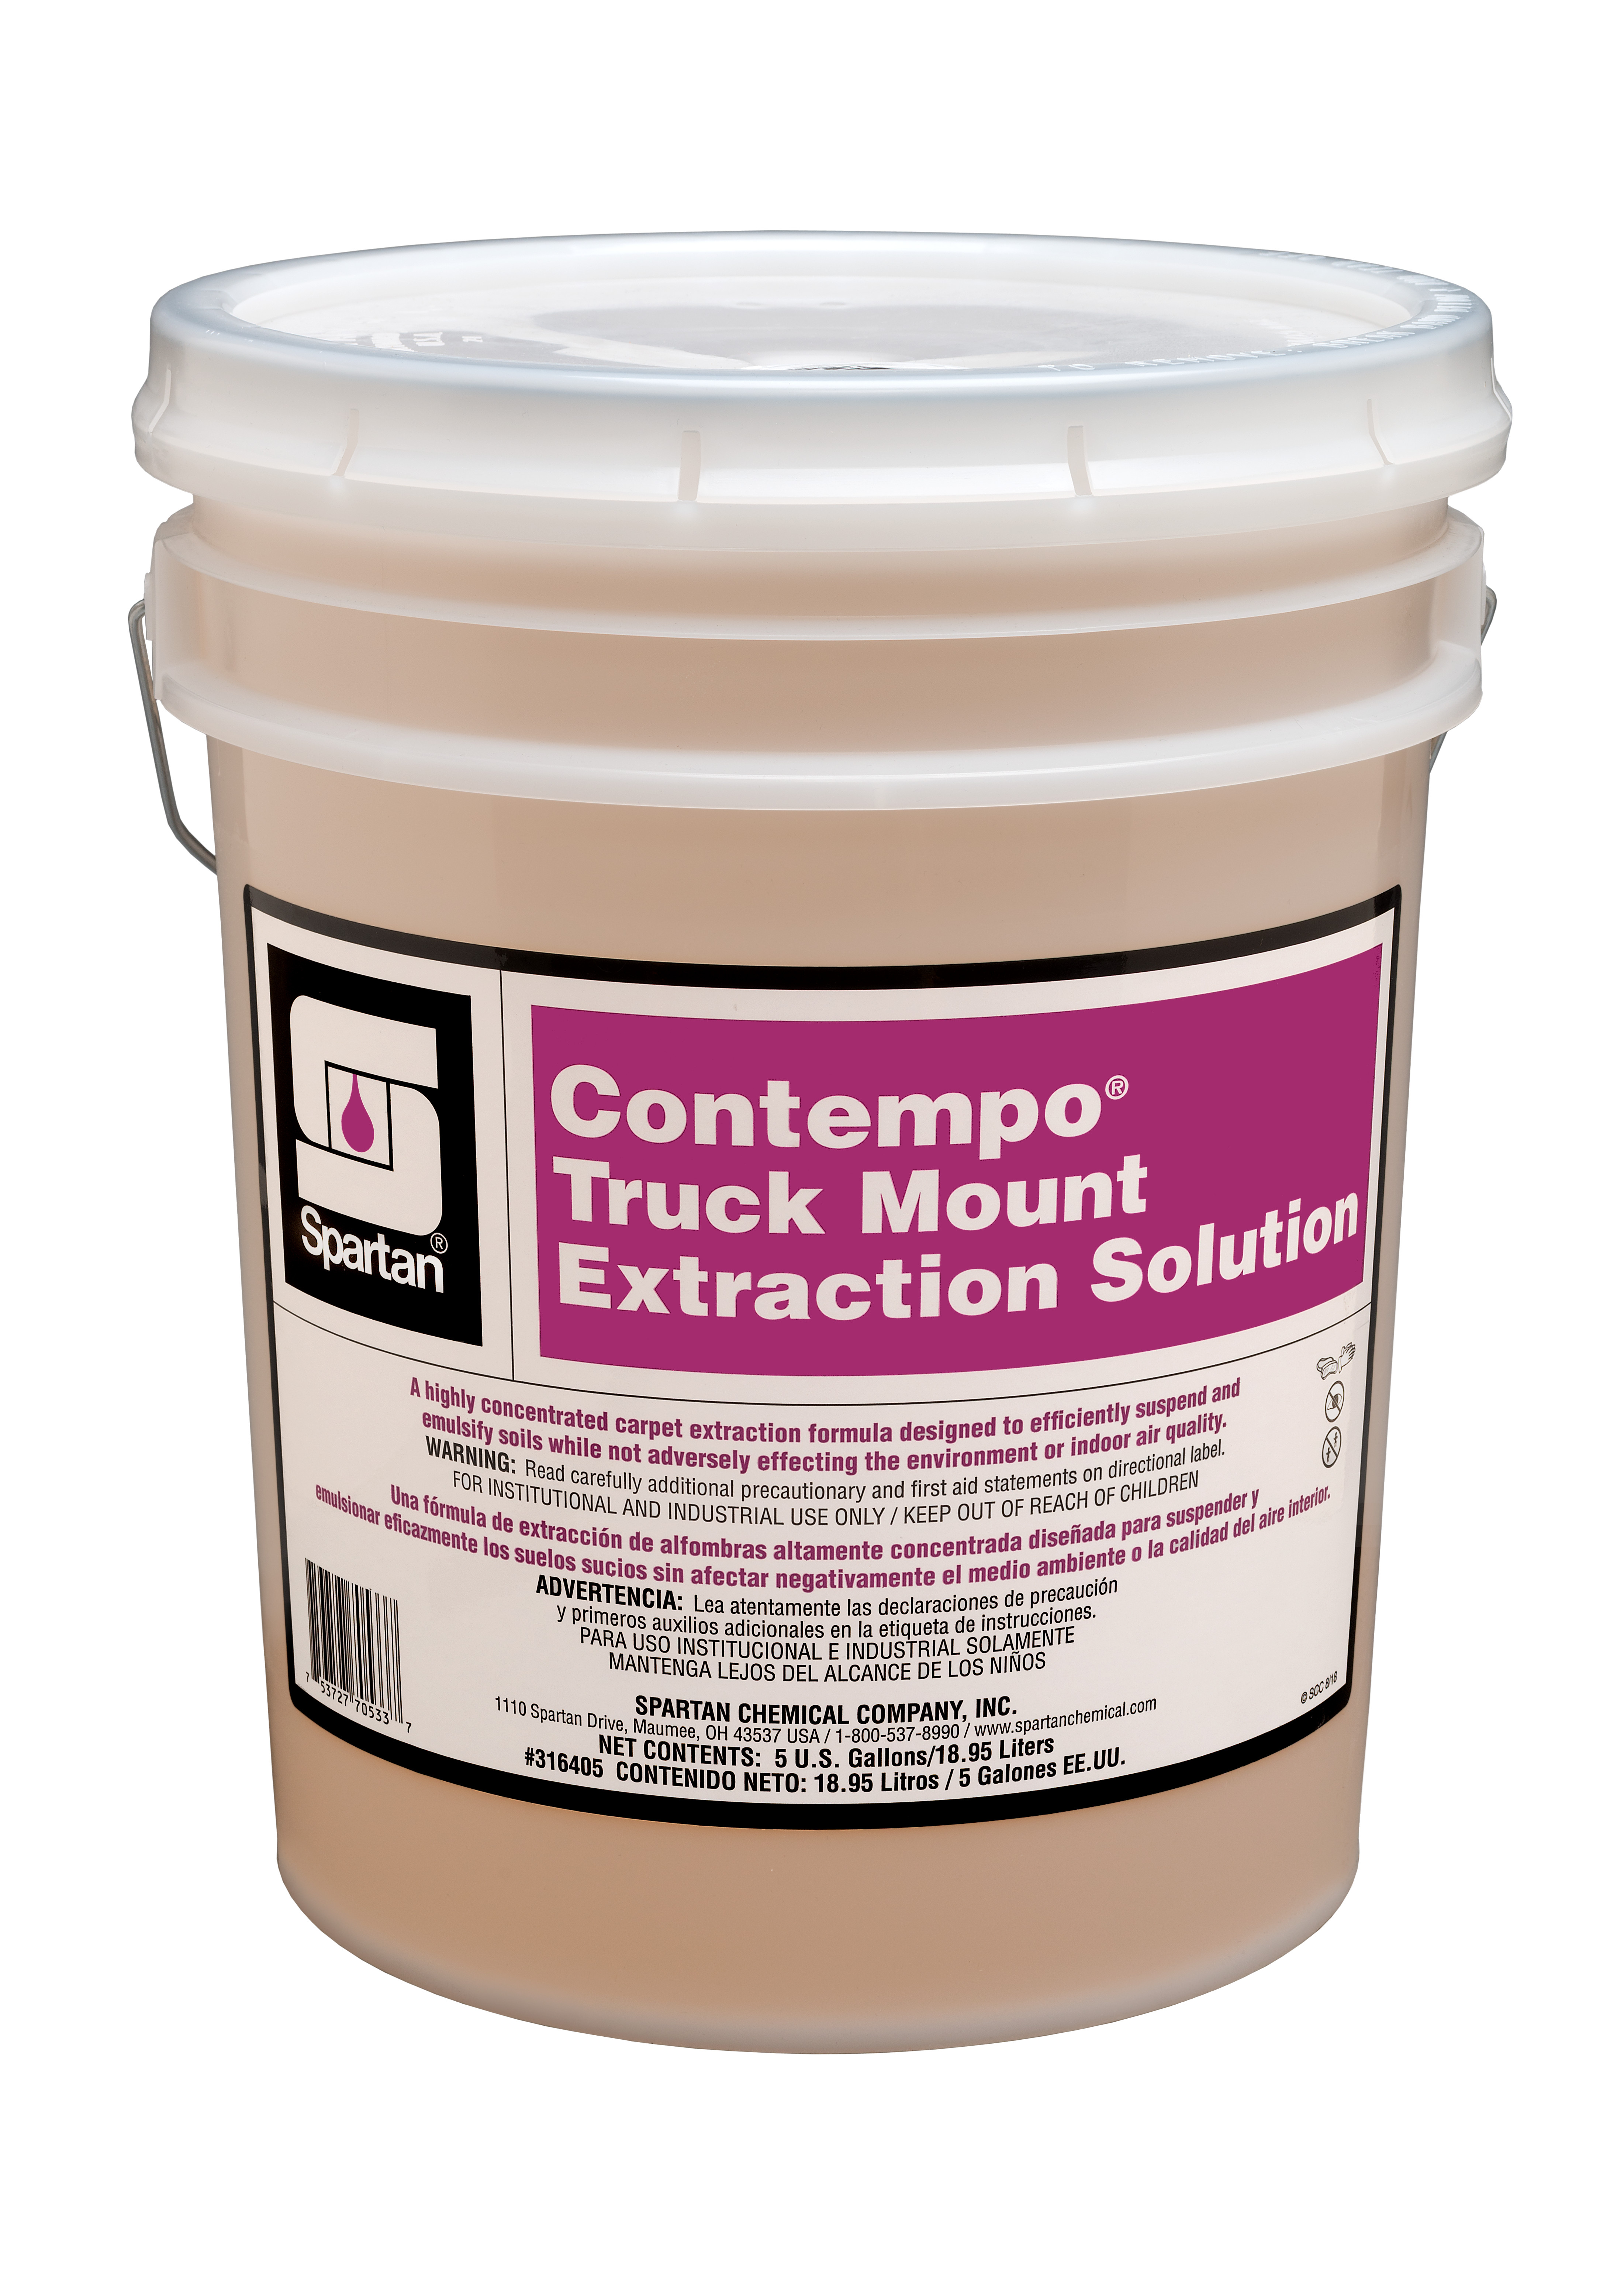 Spartan Chemical Company Contempo Truck Mount Extraction Solution, 5 GAL PAIL